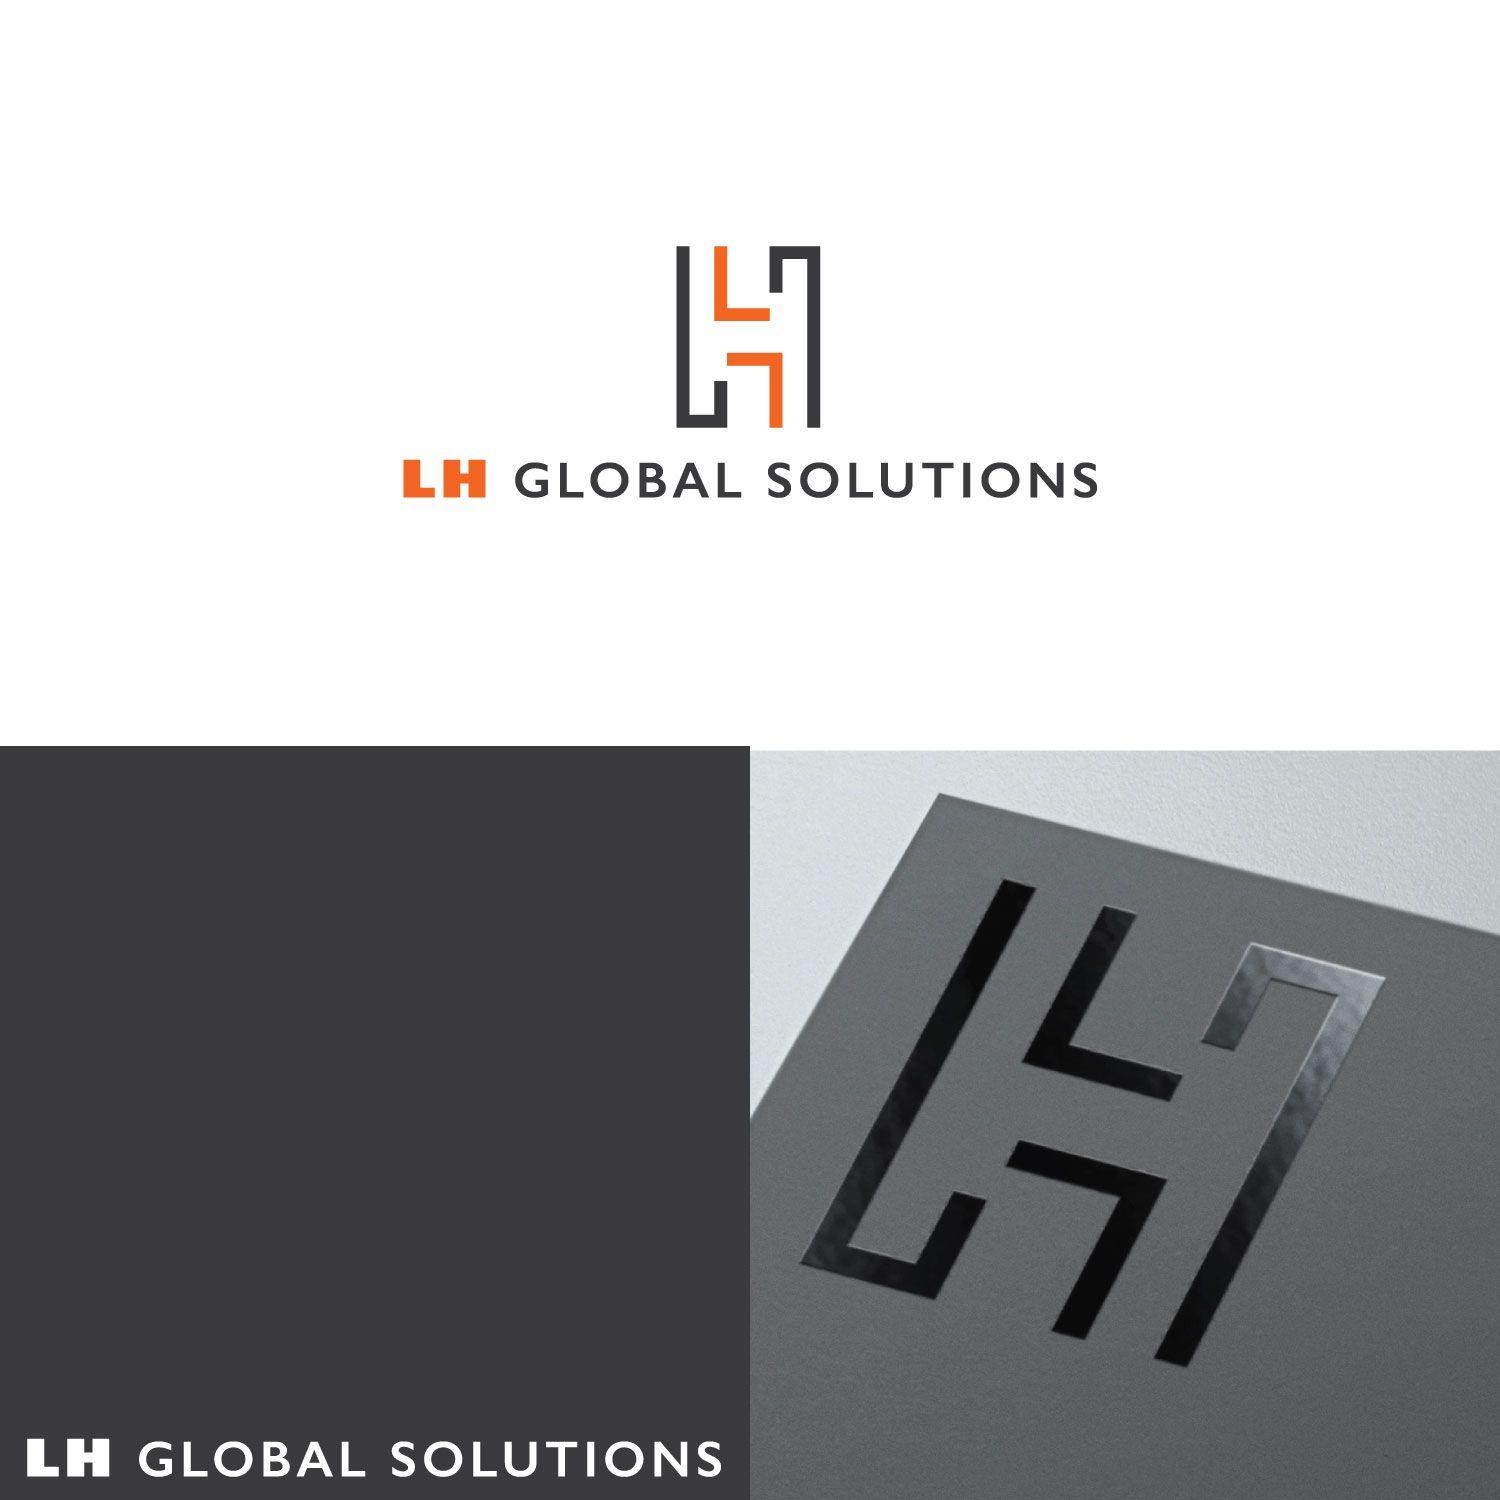 LH Logo - Professional, Serious, Business Consultant Logo Design for LH Global ...